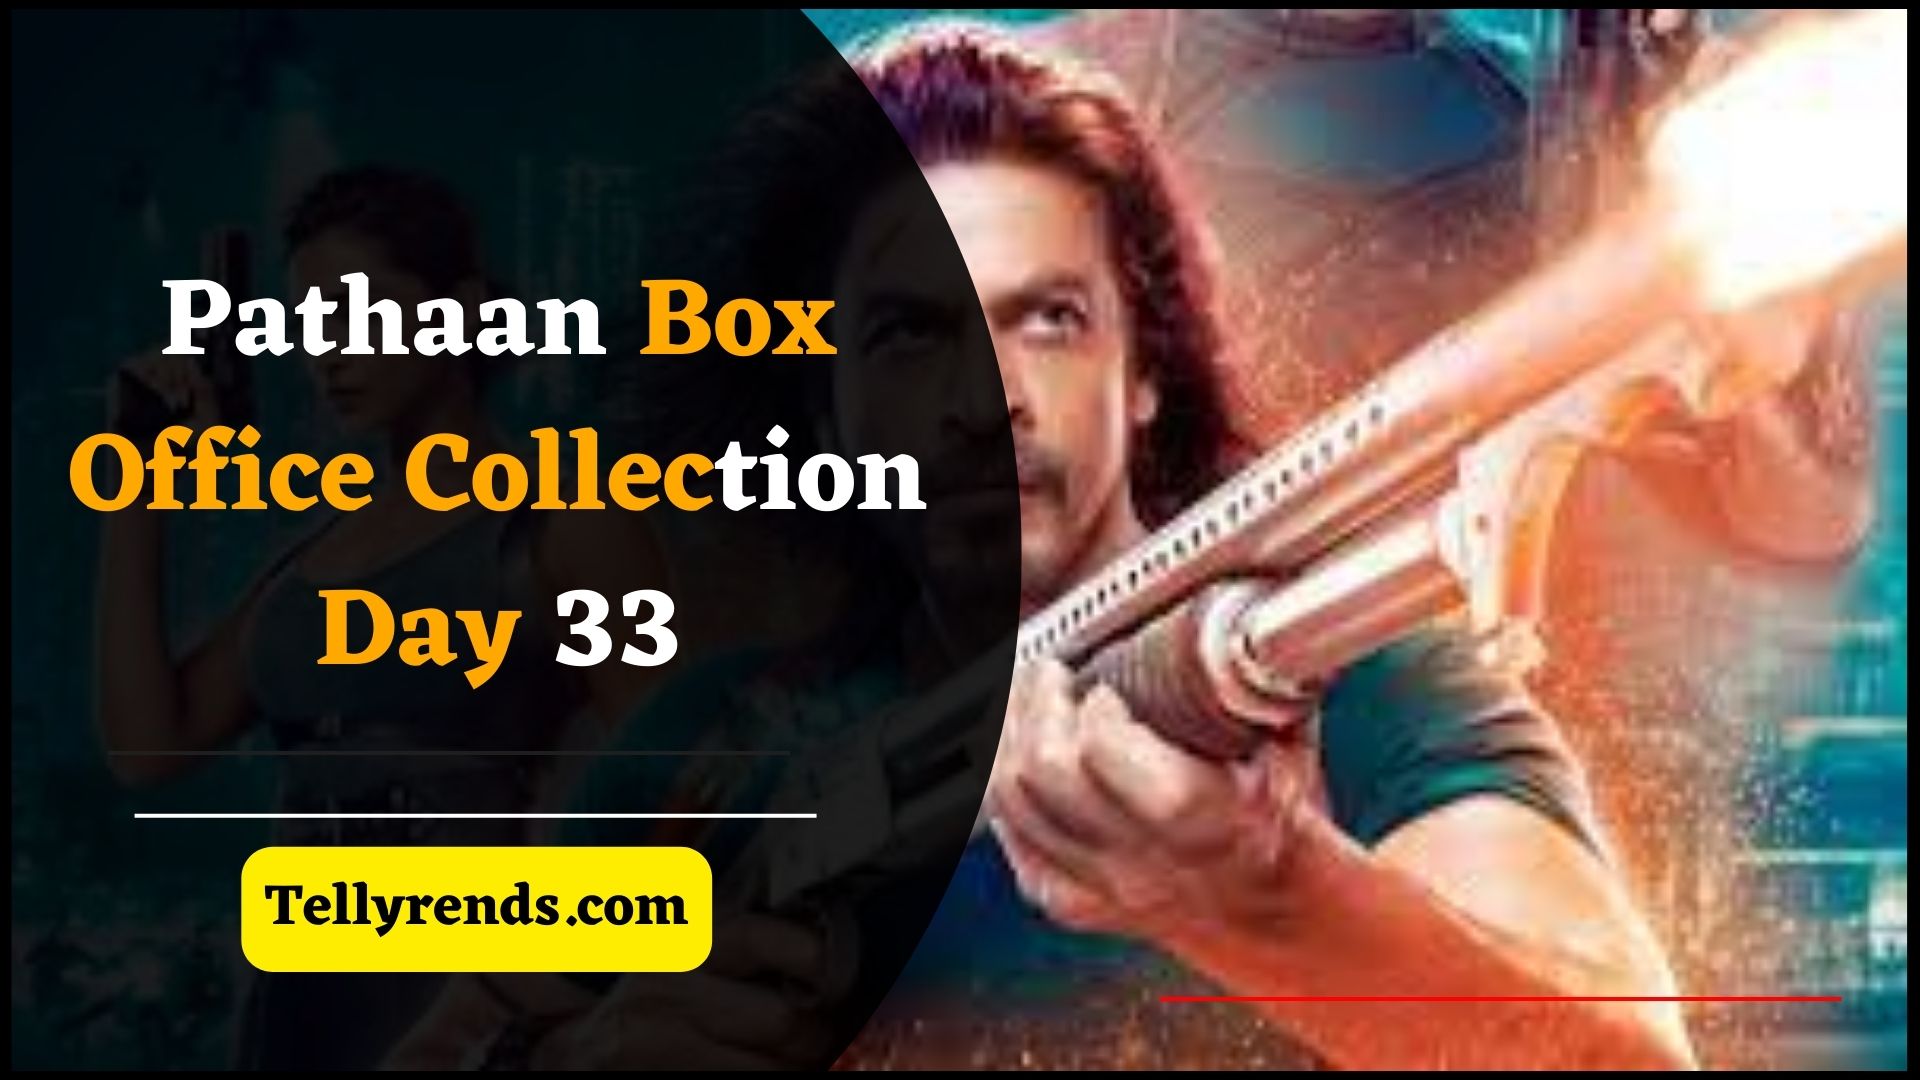 Pathaan Box Office Collection Day 33